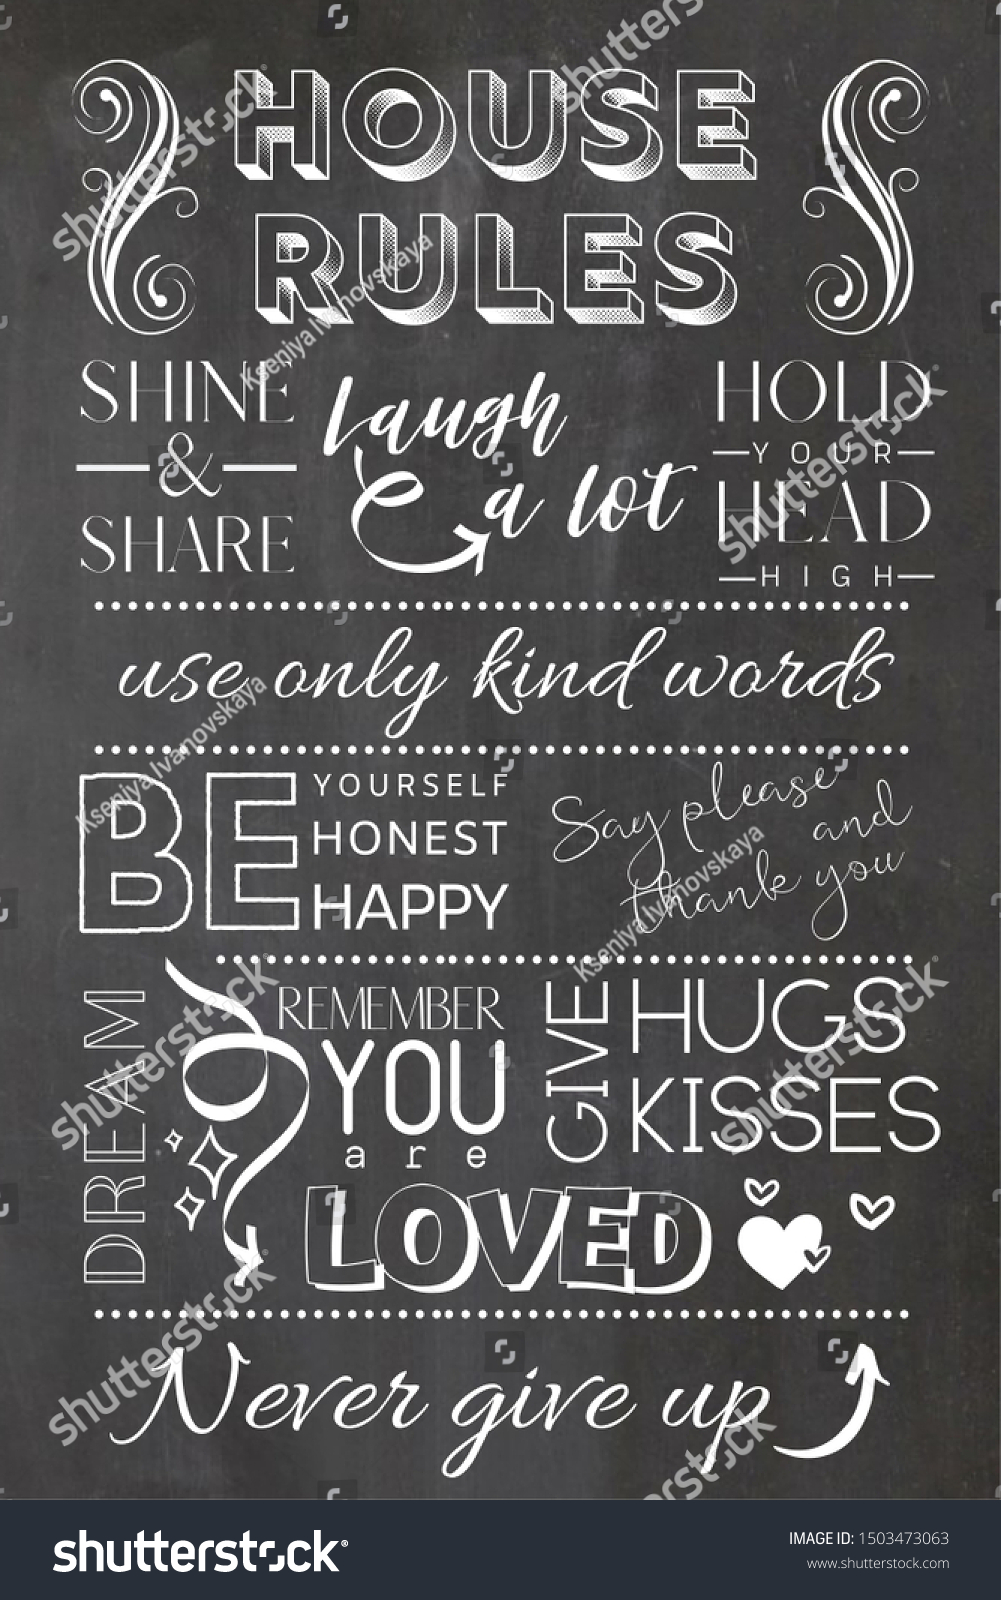 Family Rules House Rules Quotes high quality poster wall poster Choose your Size